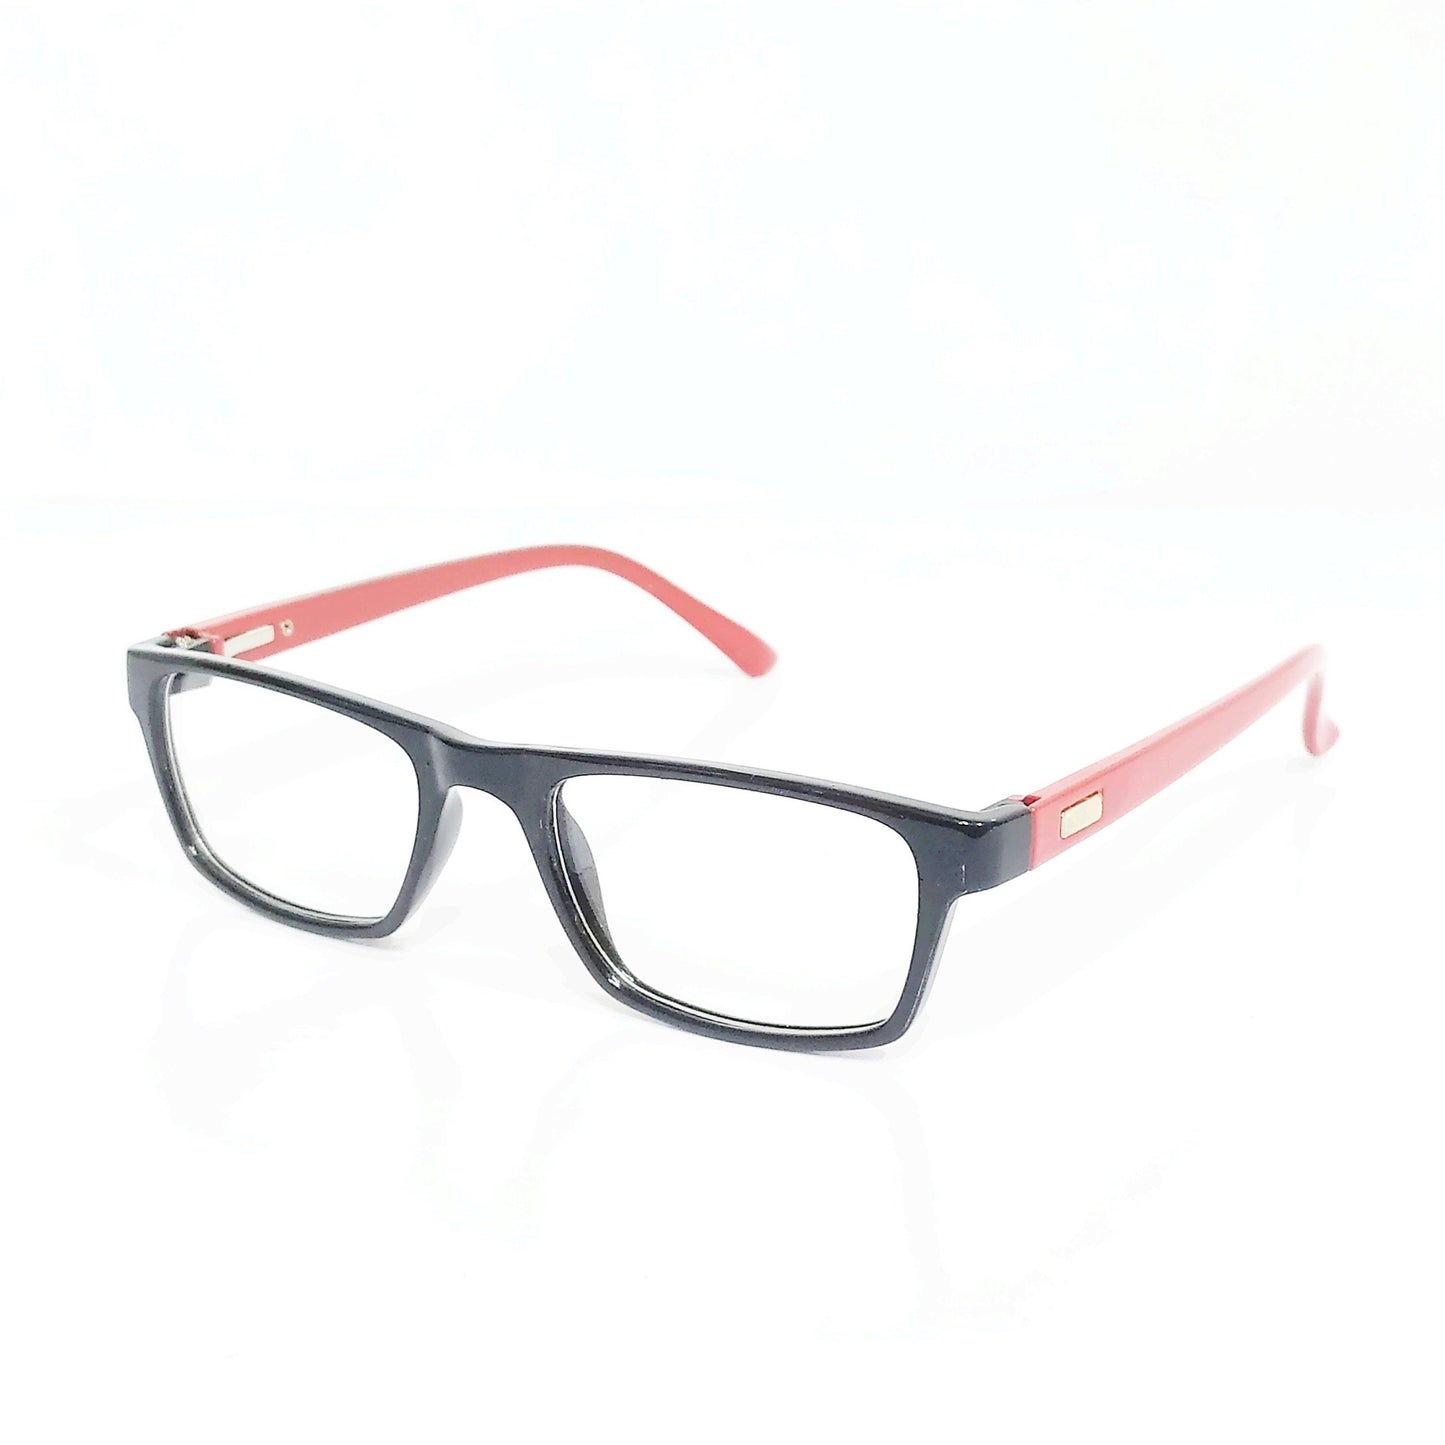 Buy Black Red Rectangle Spectacle Frame for Teens - Glasses India Online in India